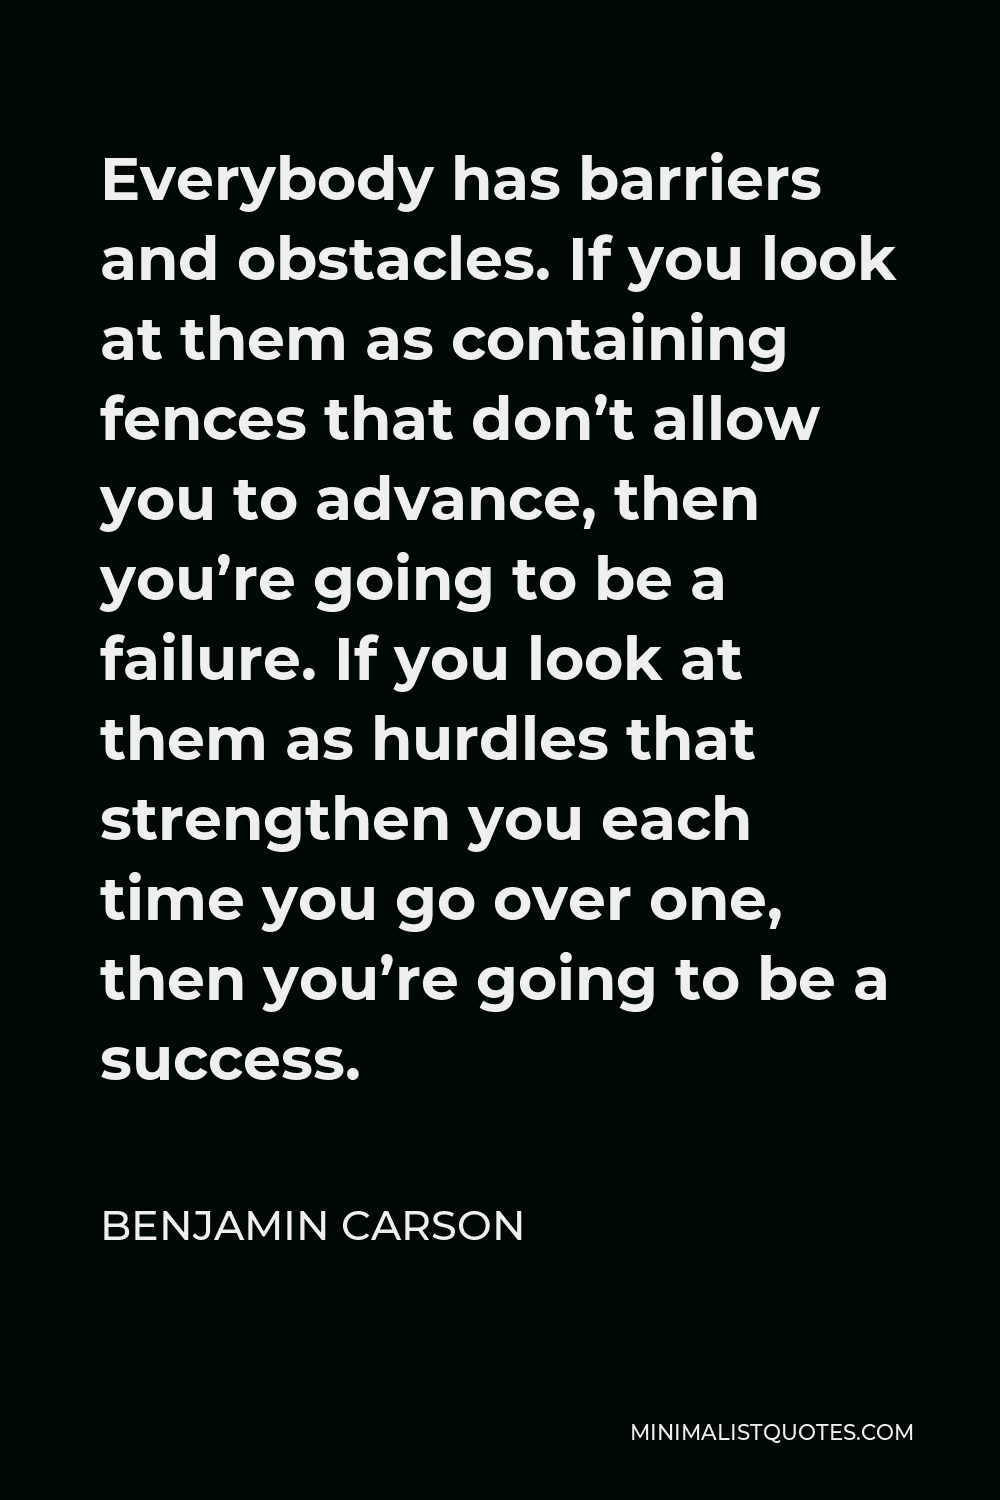 Benjamin Carson Quote - Everybody has barriers and obstacles. If you look at them as containing fences that don’t allow you to advance, then you’re going to be a failure. If you look at them as hurdles that strengthen you each time you go over one, then you’re going to be a success.